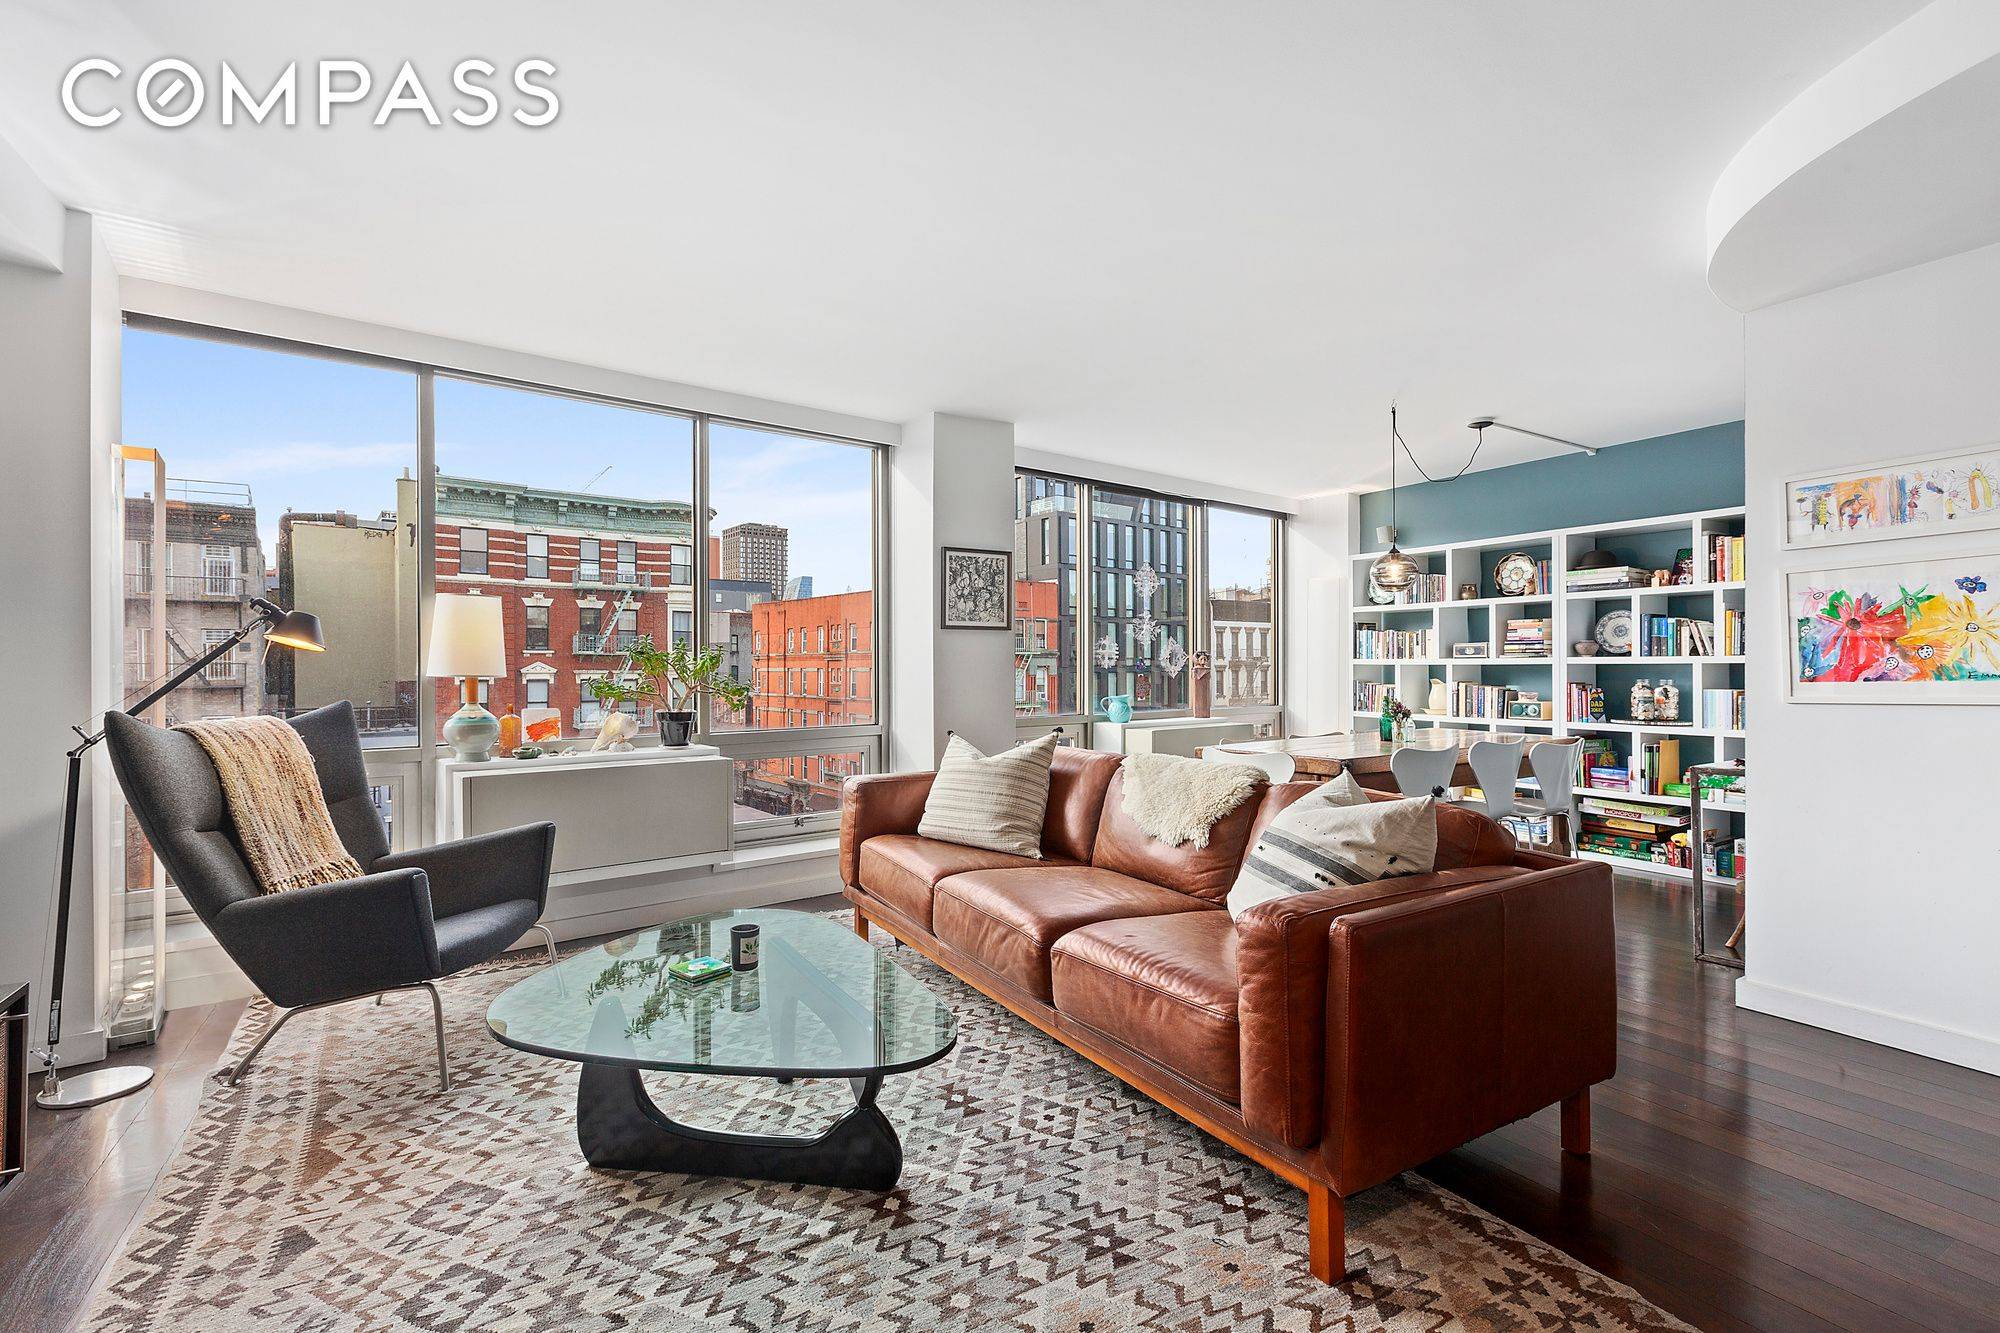 Welcome to this spacious three bedroom three bathroom residence with southwestern exposure and gorgeous views of the Freedom Tower.